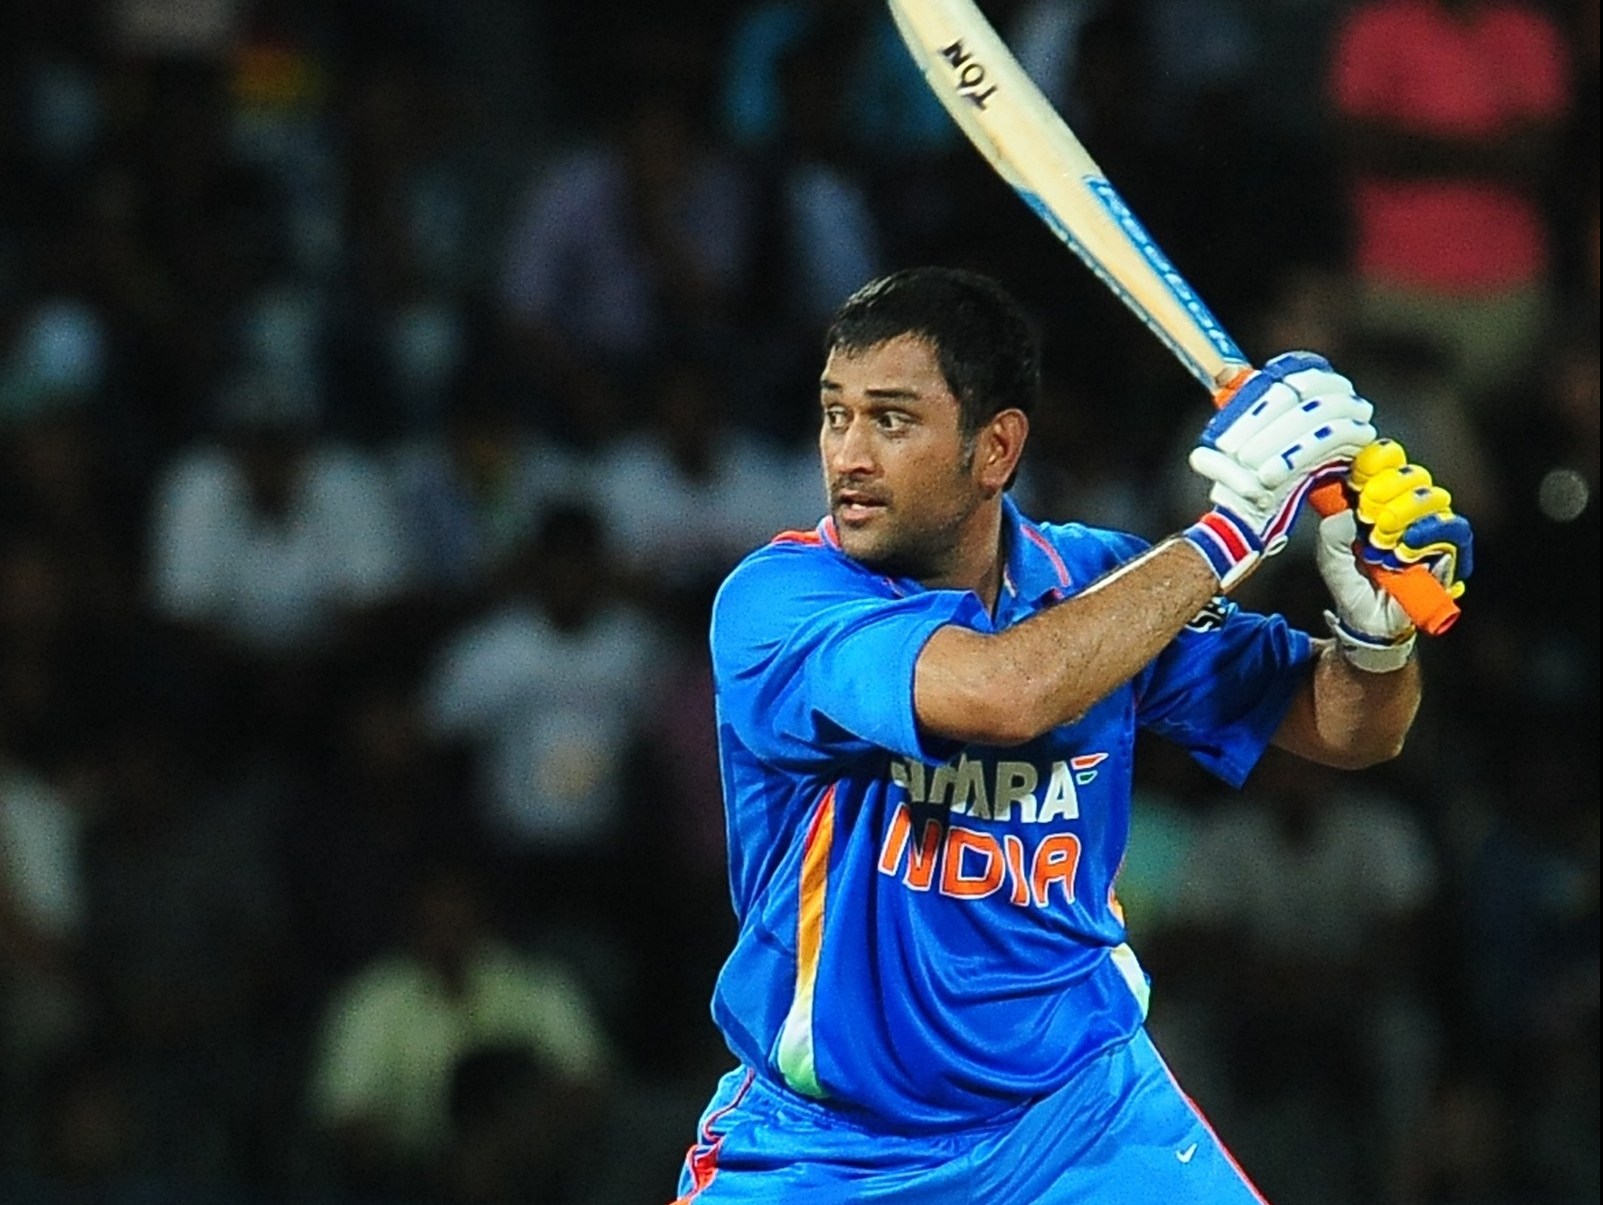 Hd Wallpapers Ms Dhoni Image Download - HD Wallpaper 